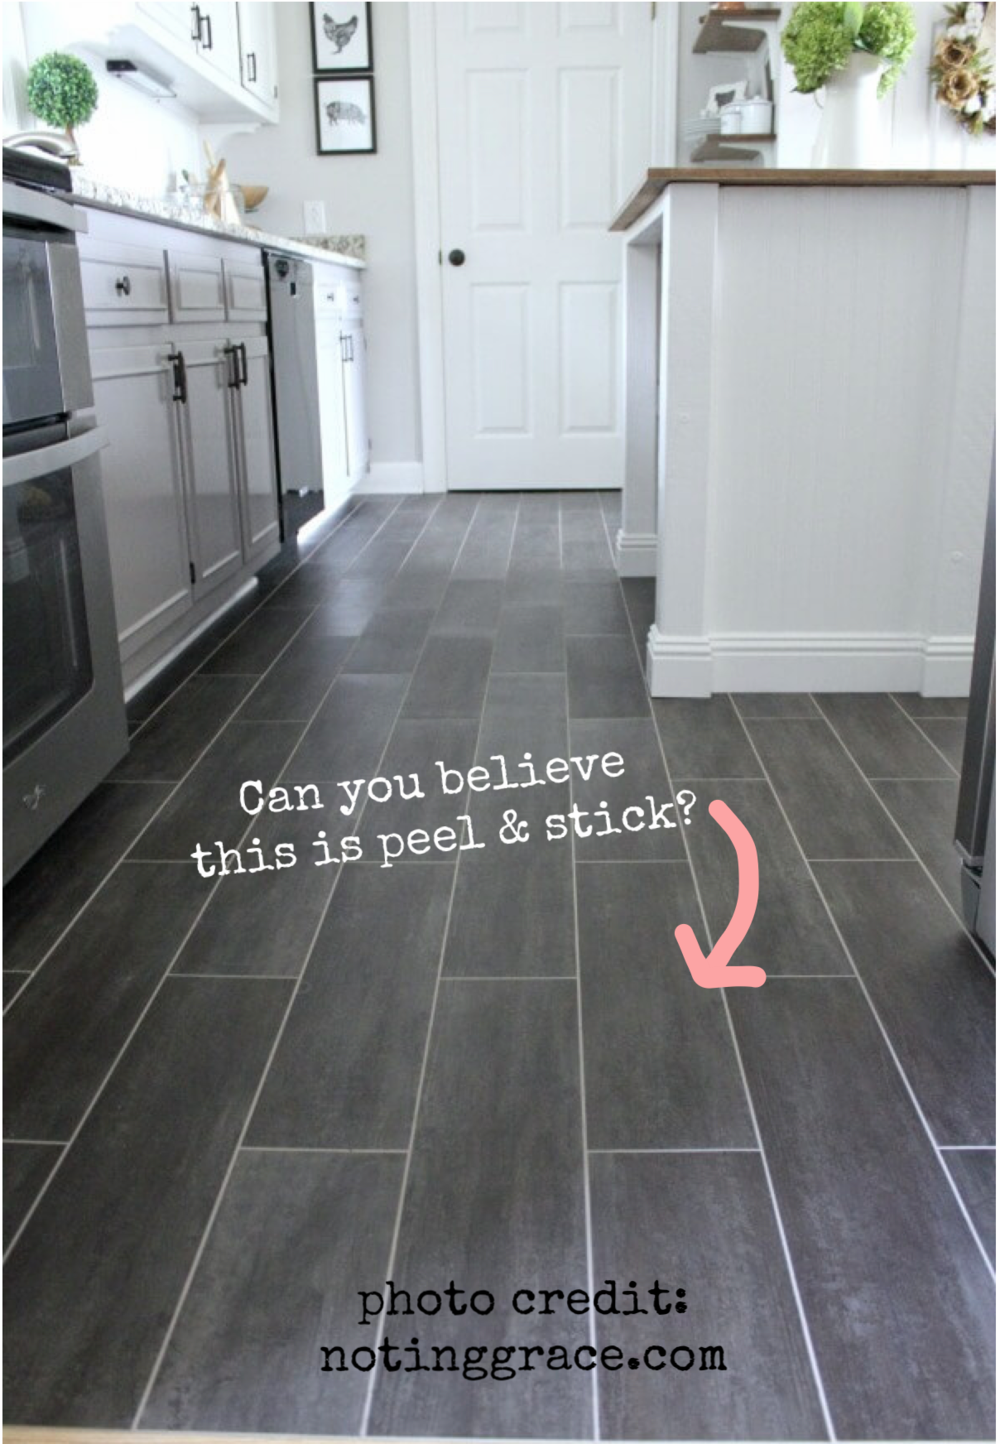 Ideas For Covering Up Tile Floors, What Flooring Can Be Laid Over Ceramic Tile